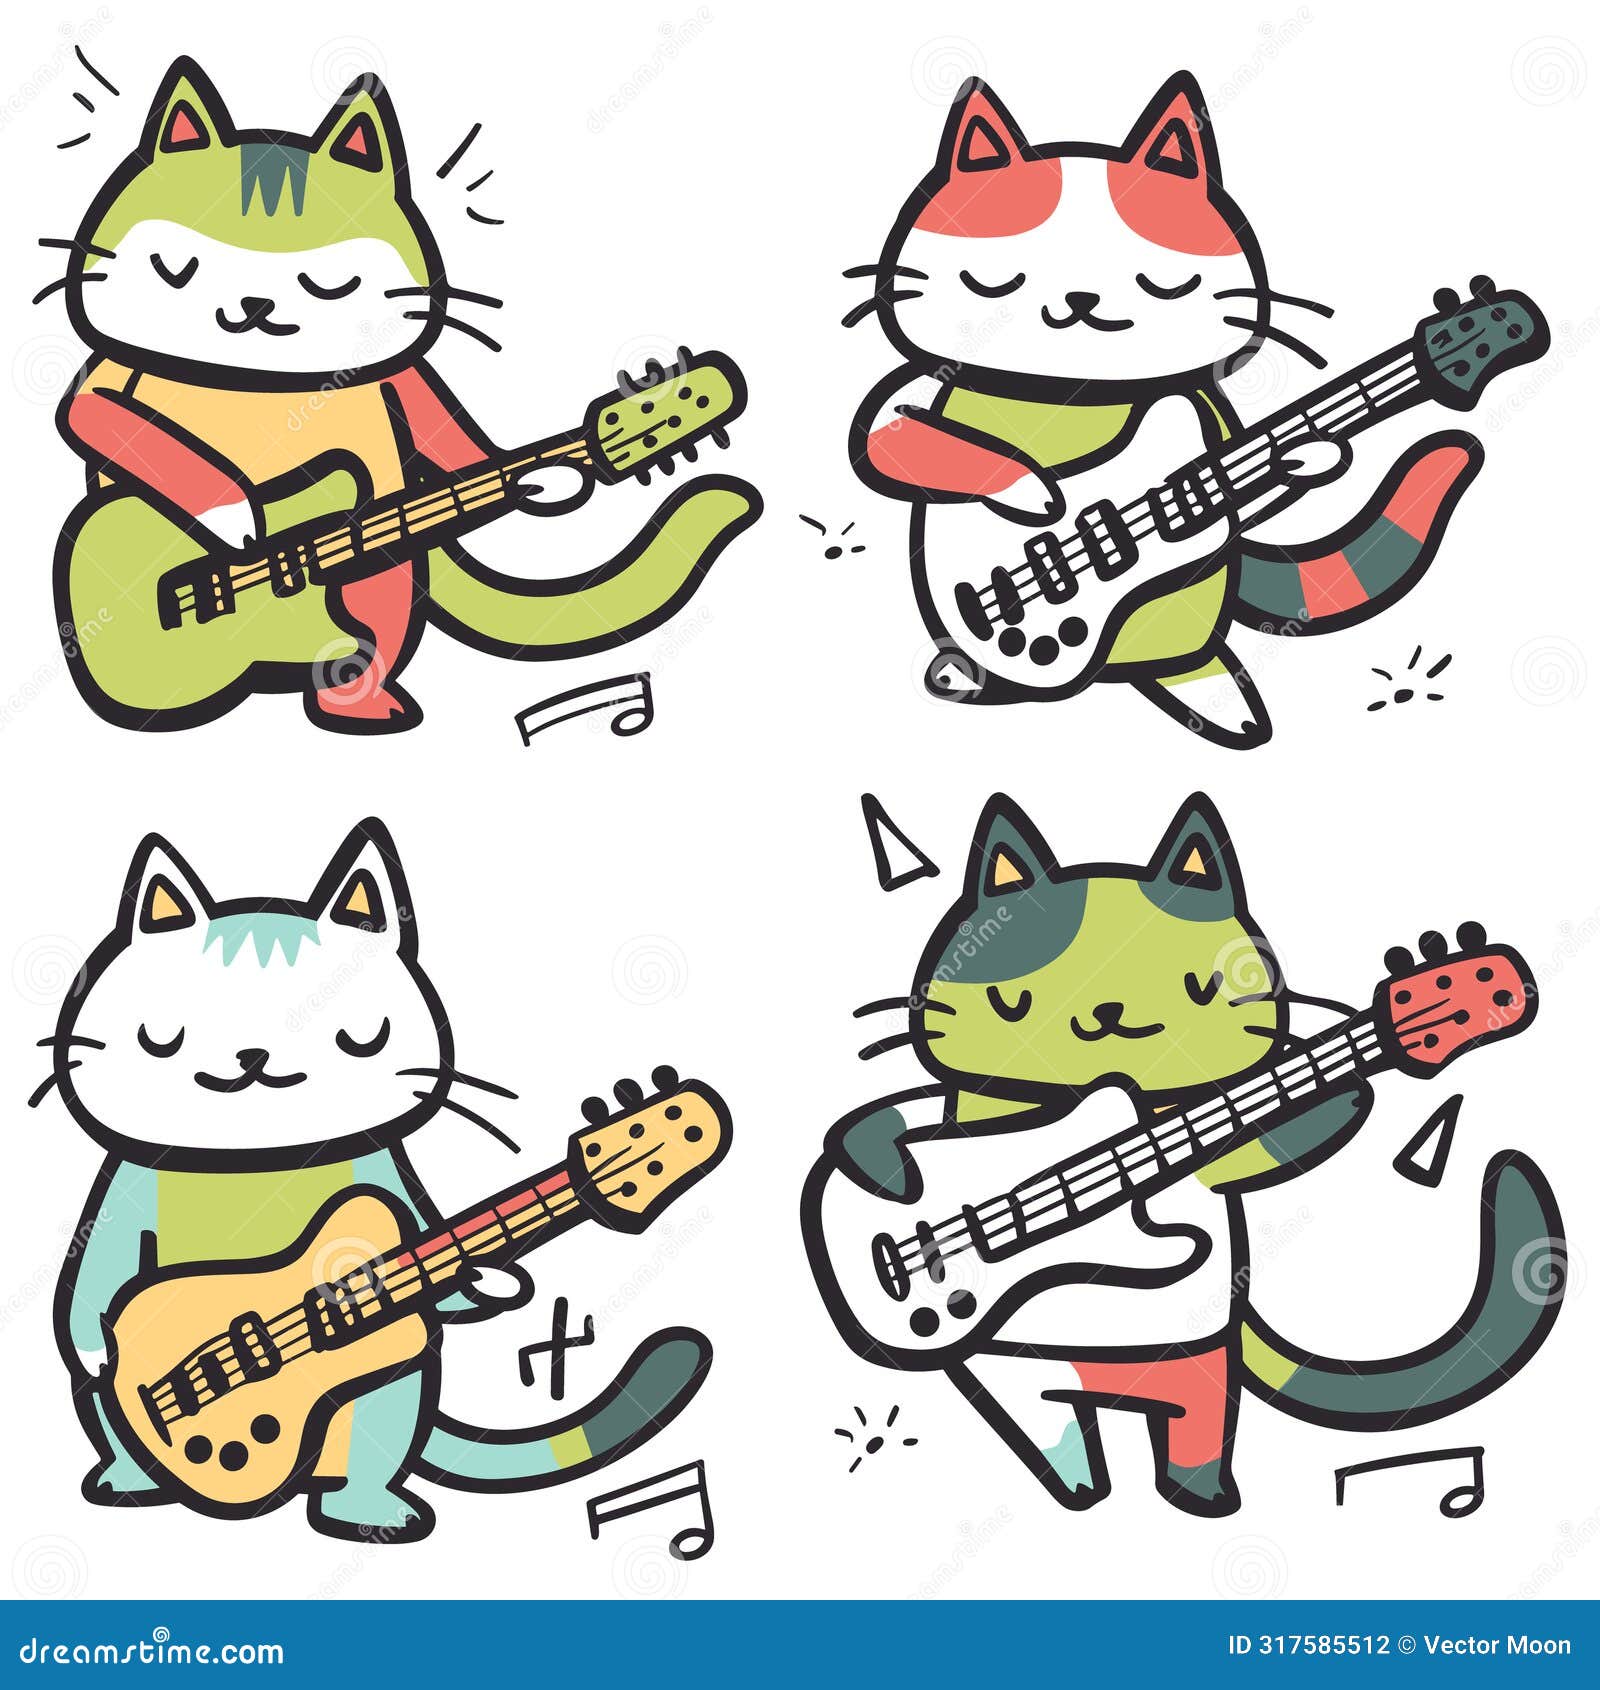 four cartoon cats playing electric guitars, colorful feline characters. cartoon cats perform band